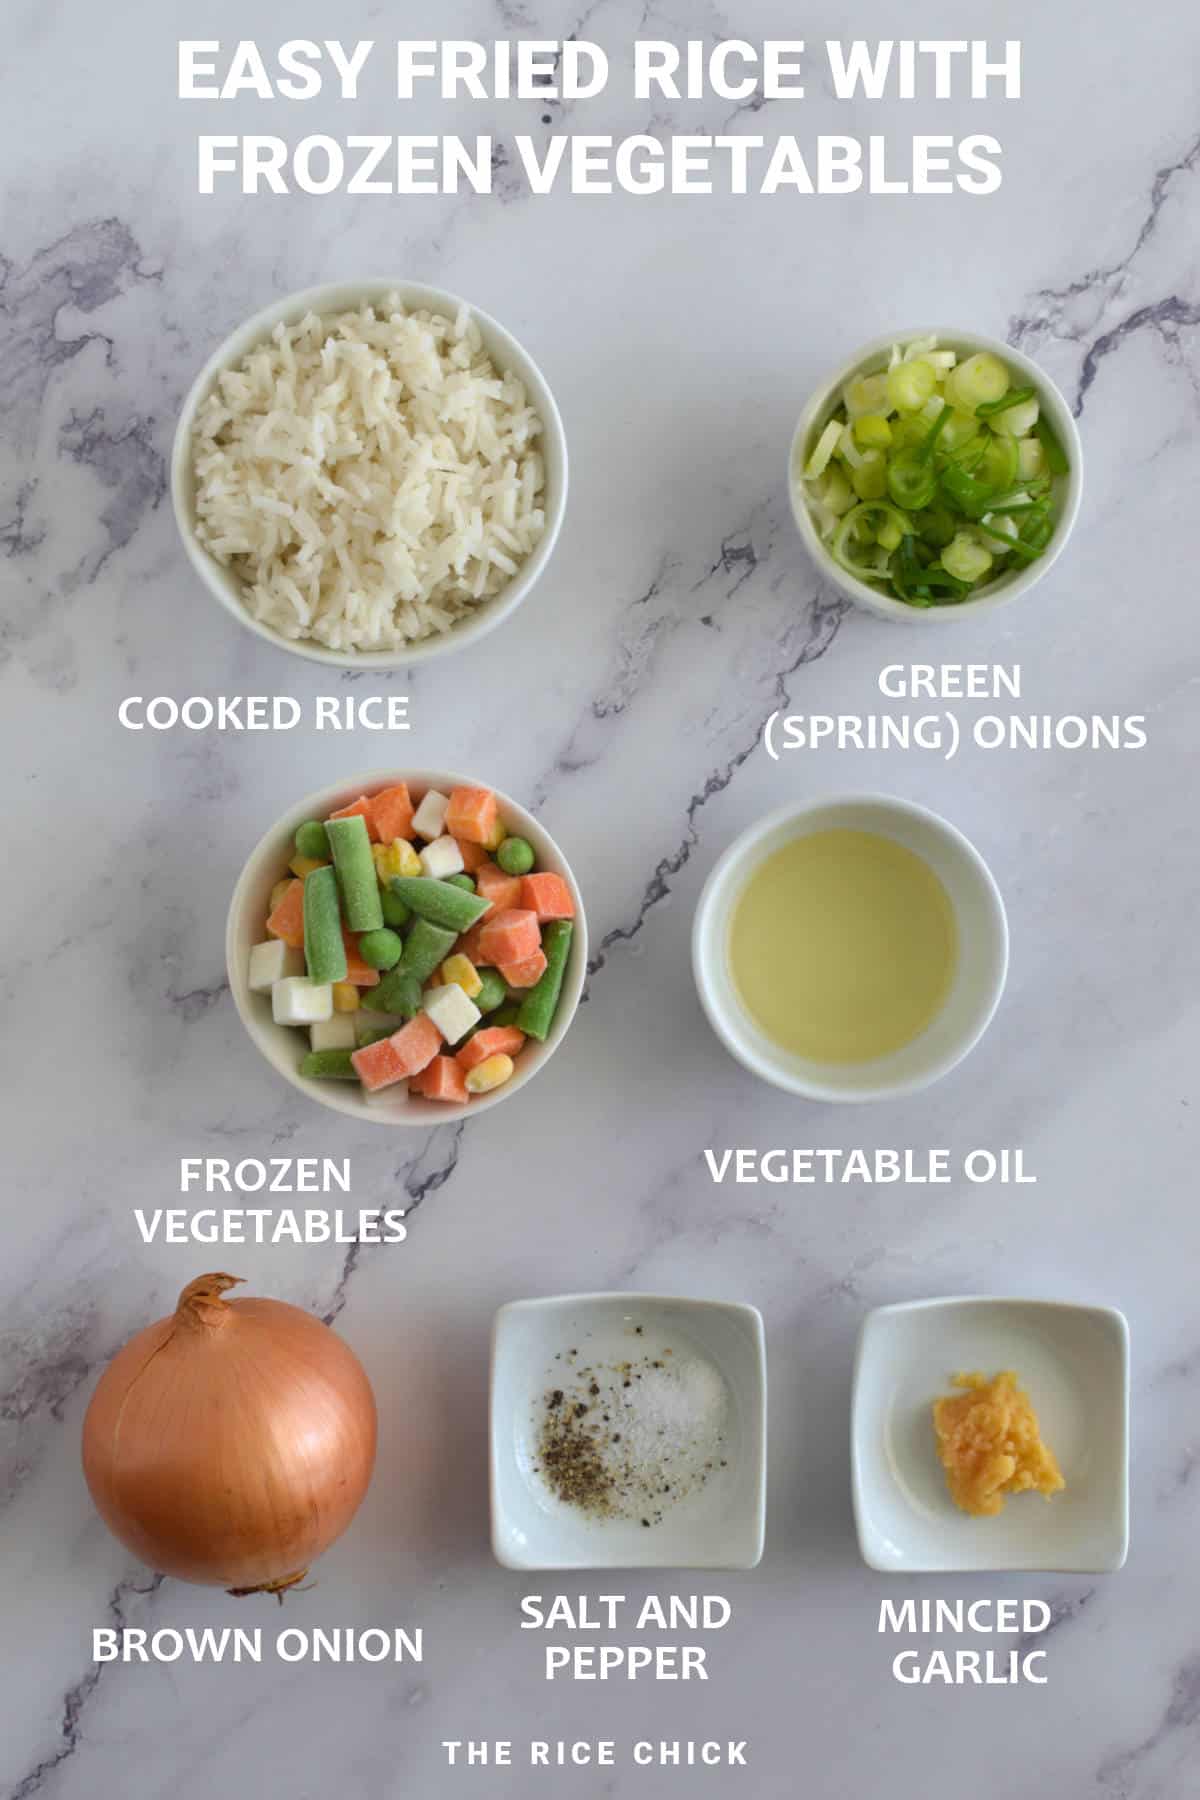 Ingredients for fried rice with frozen vegetables.